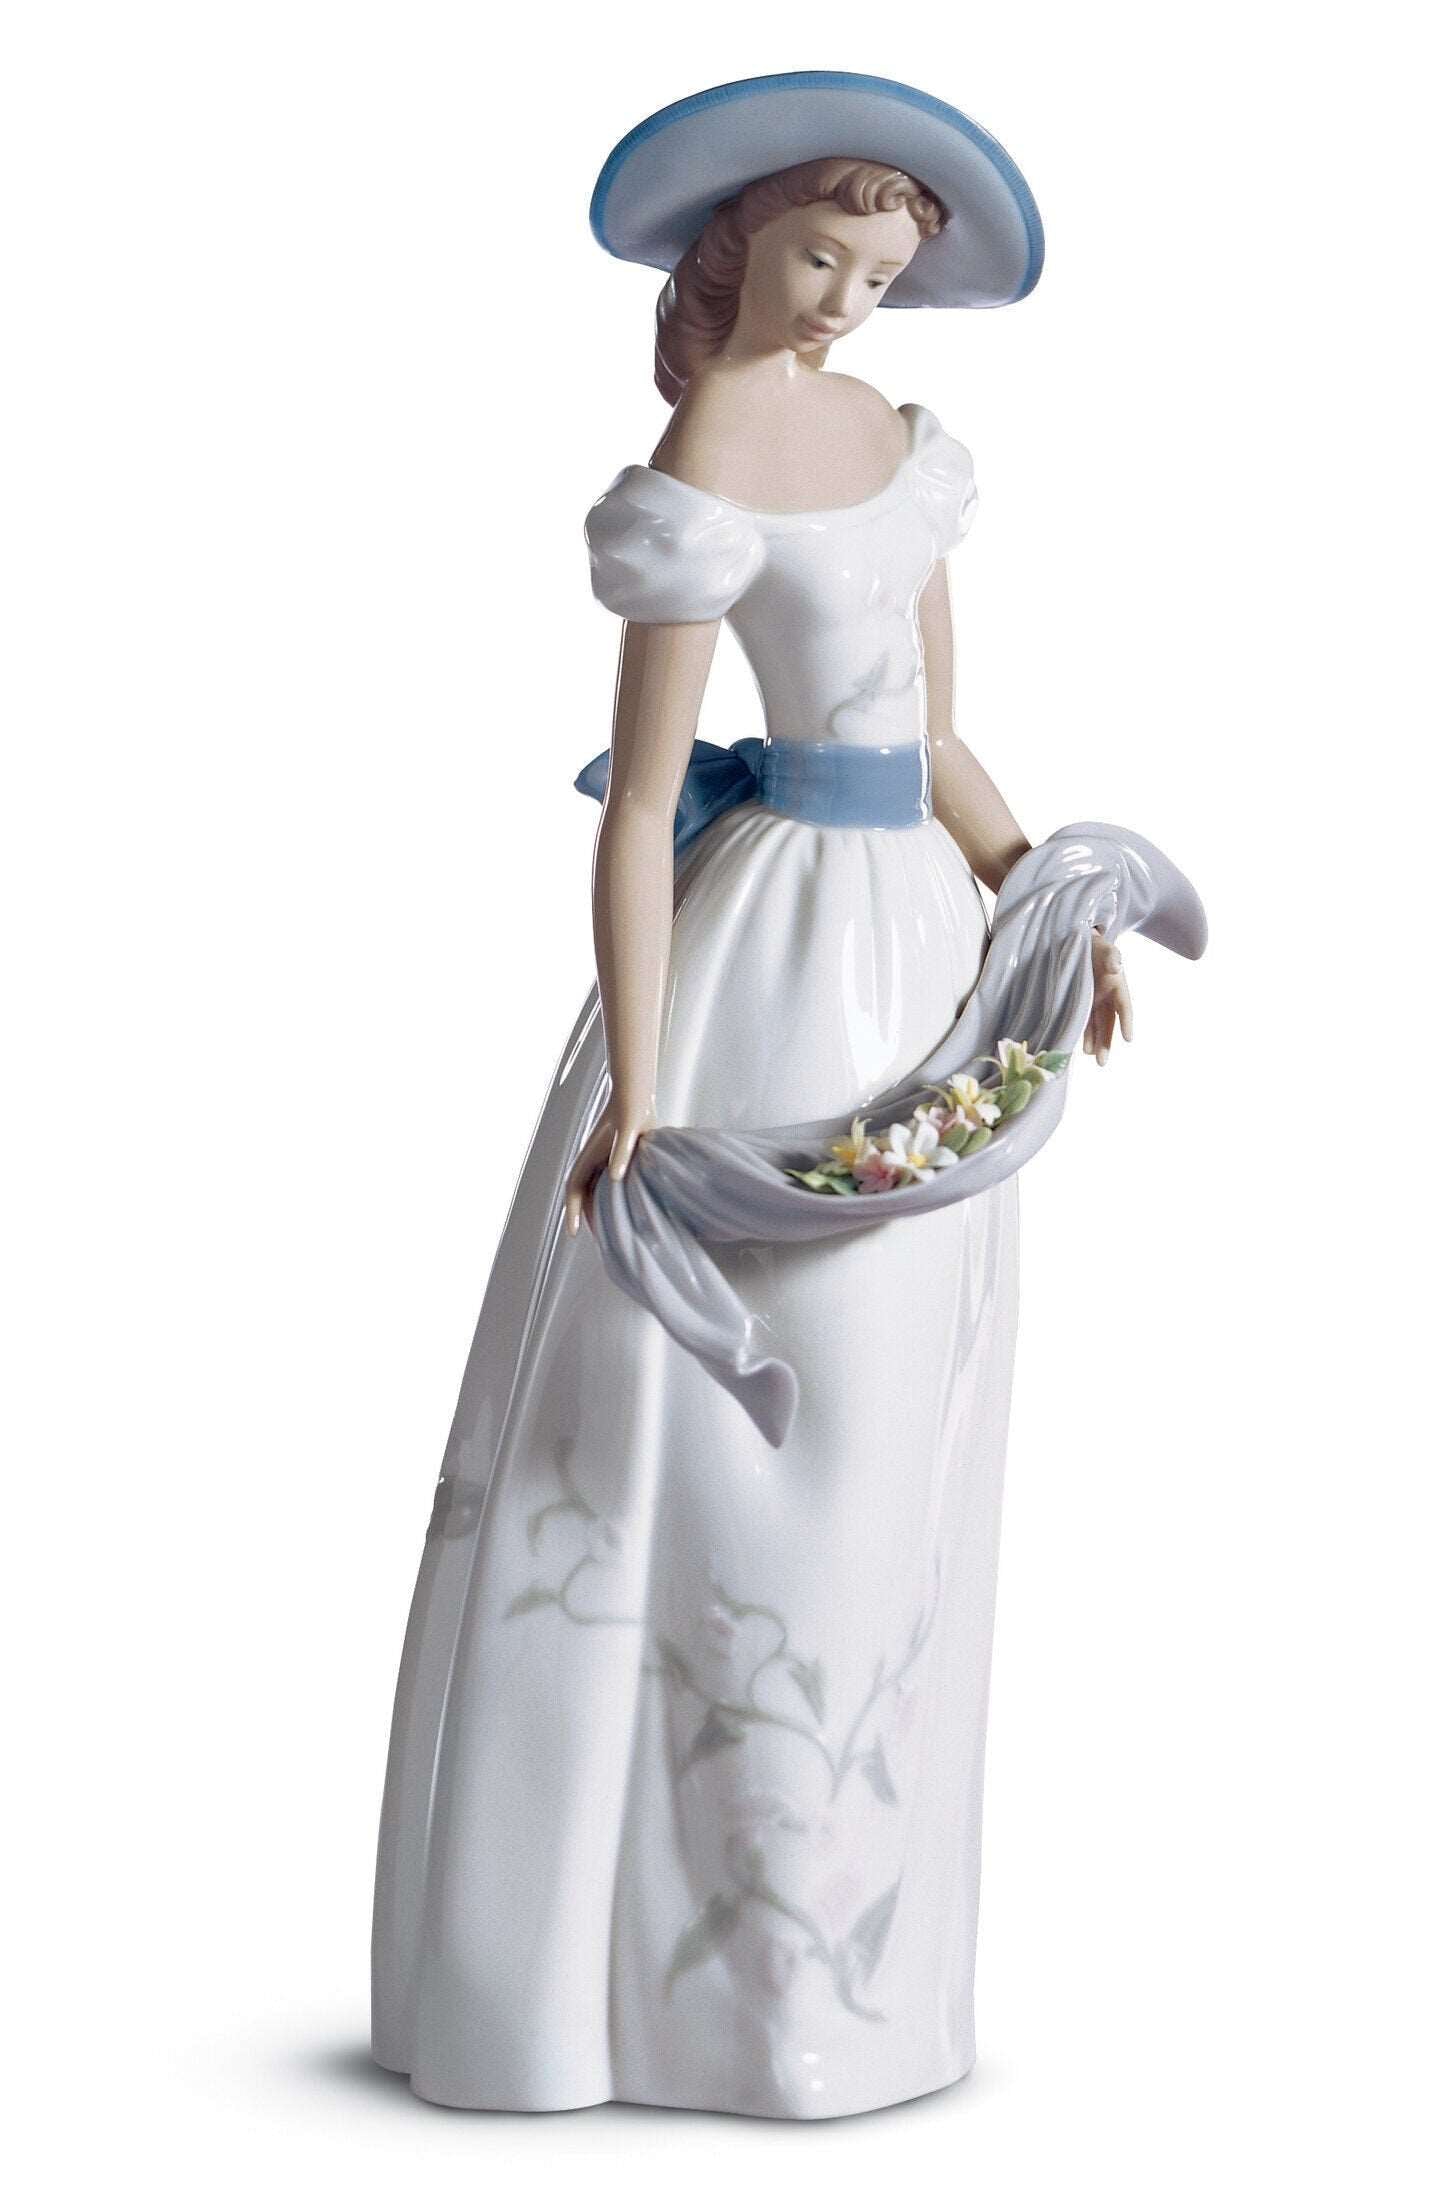 Fragances and Colours Woman Figurine